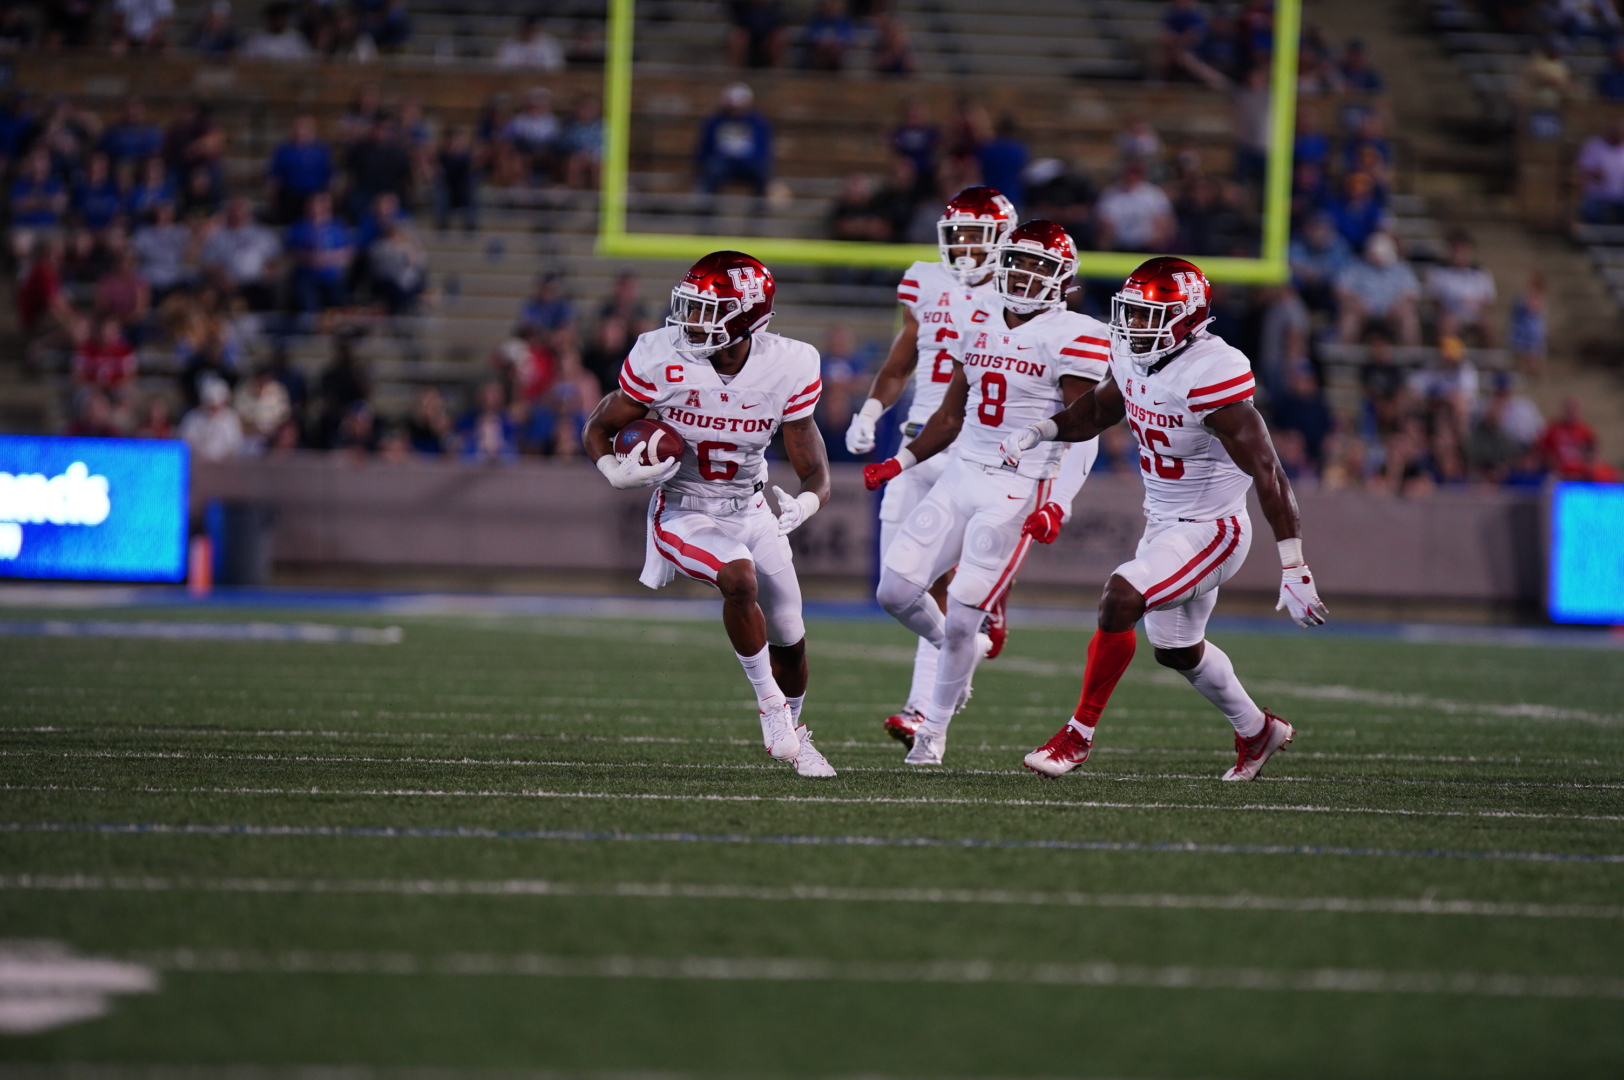 Senior cornerback Damarion Williams had one of the three interceptions for the UH defense in a dominating victory over Tulsa on Friday night. | Courtest of UH athletics